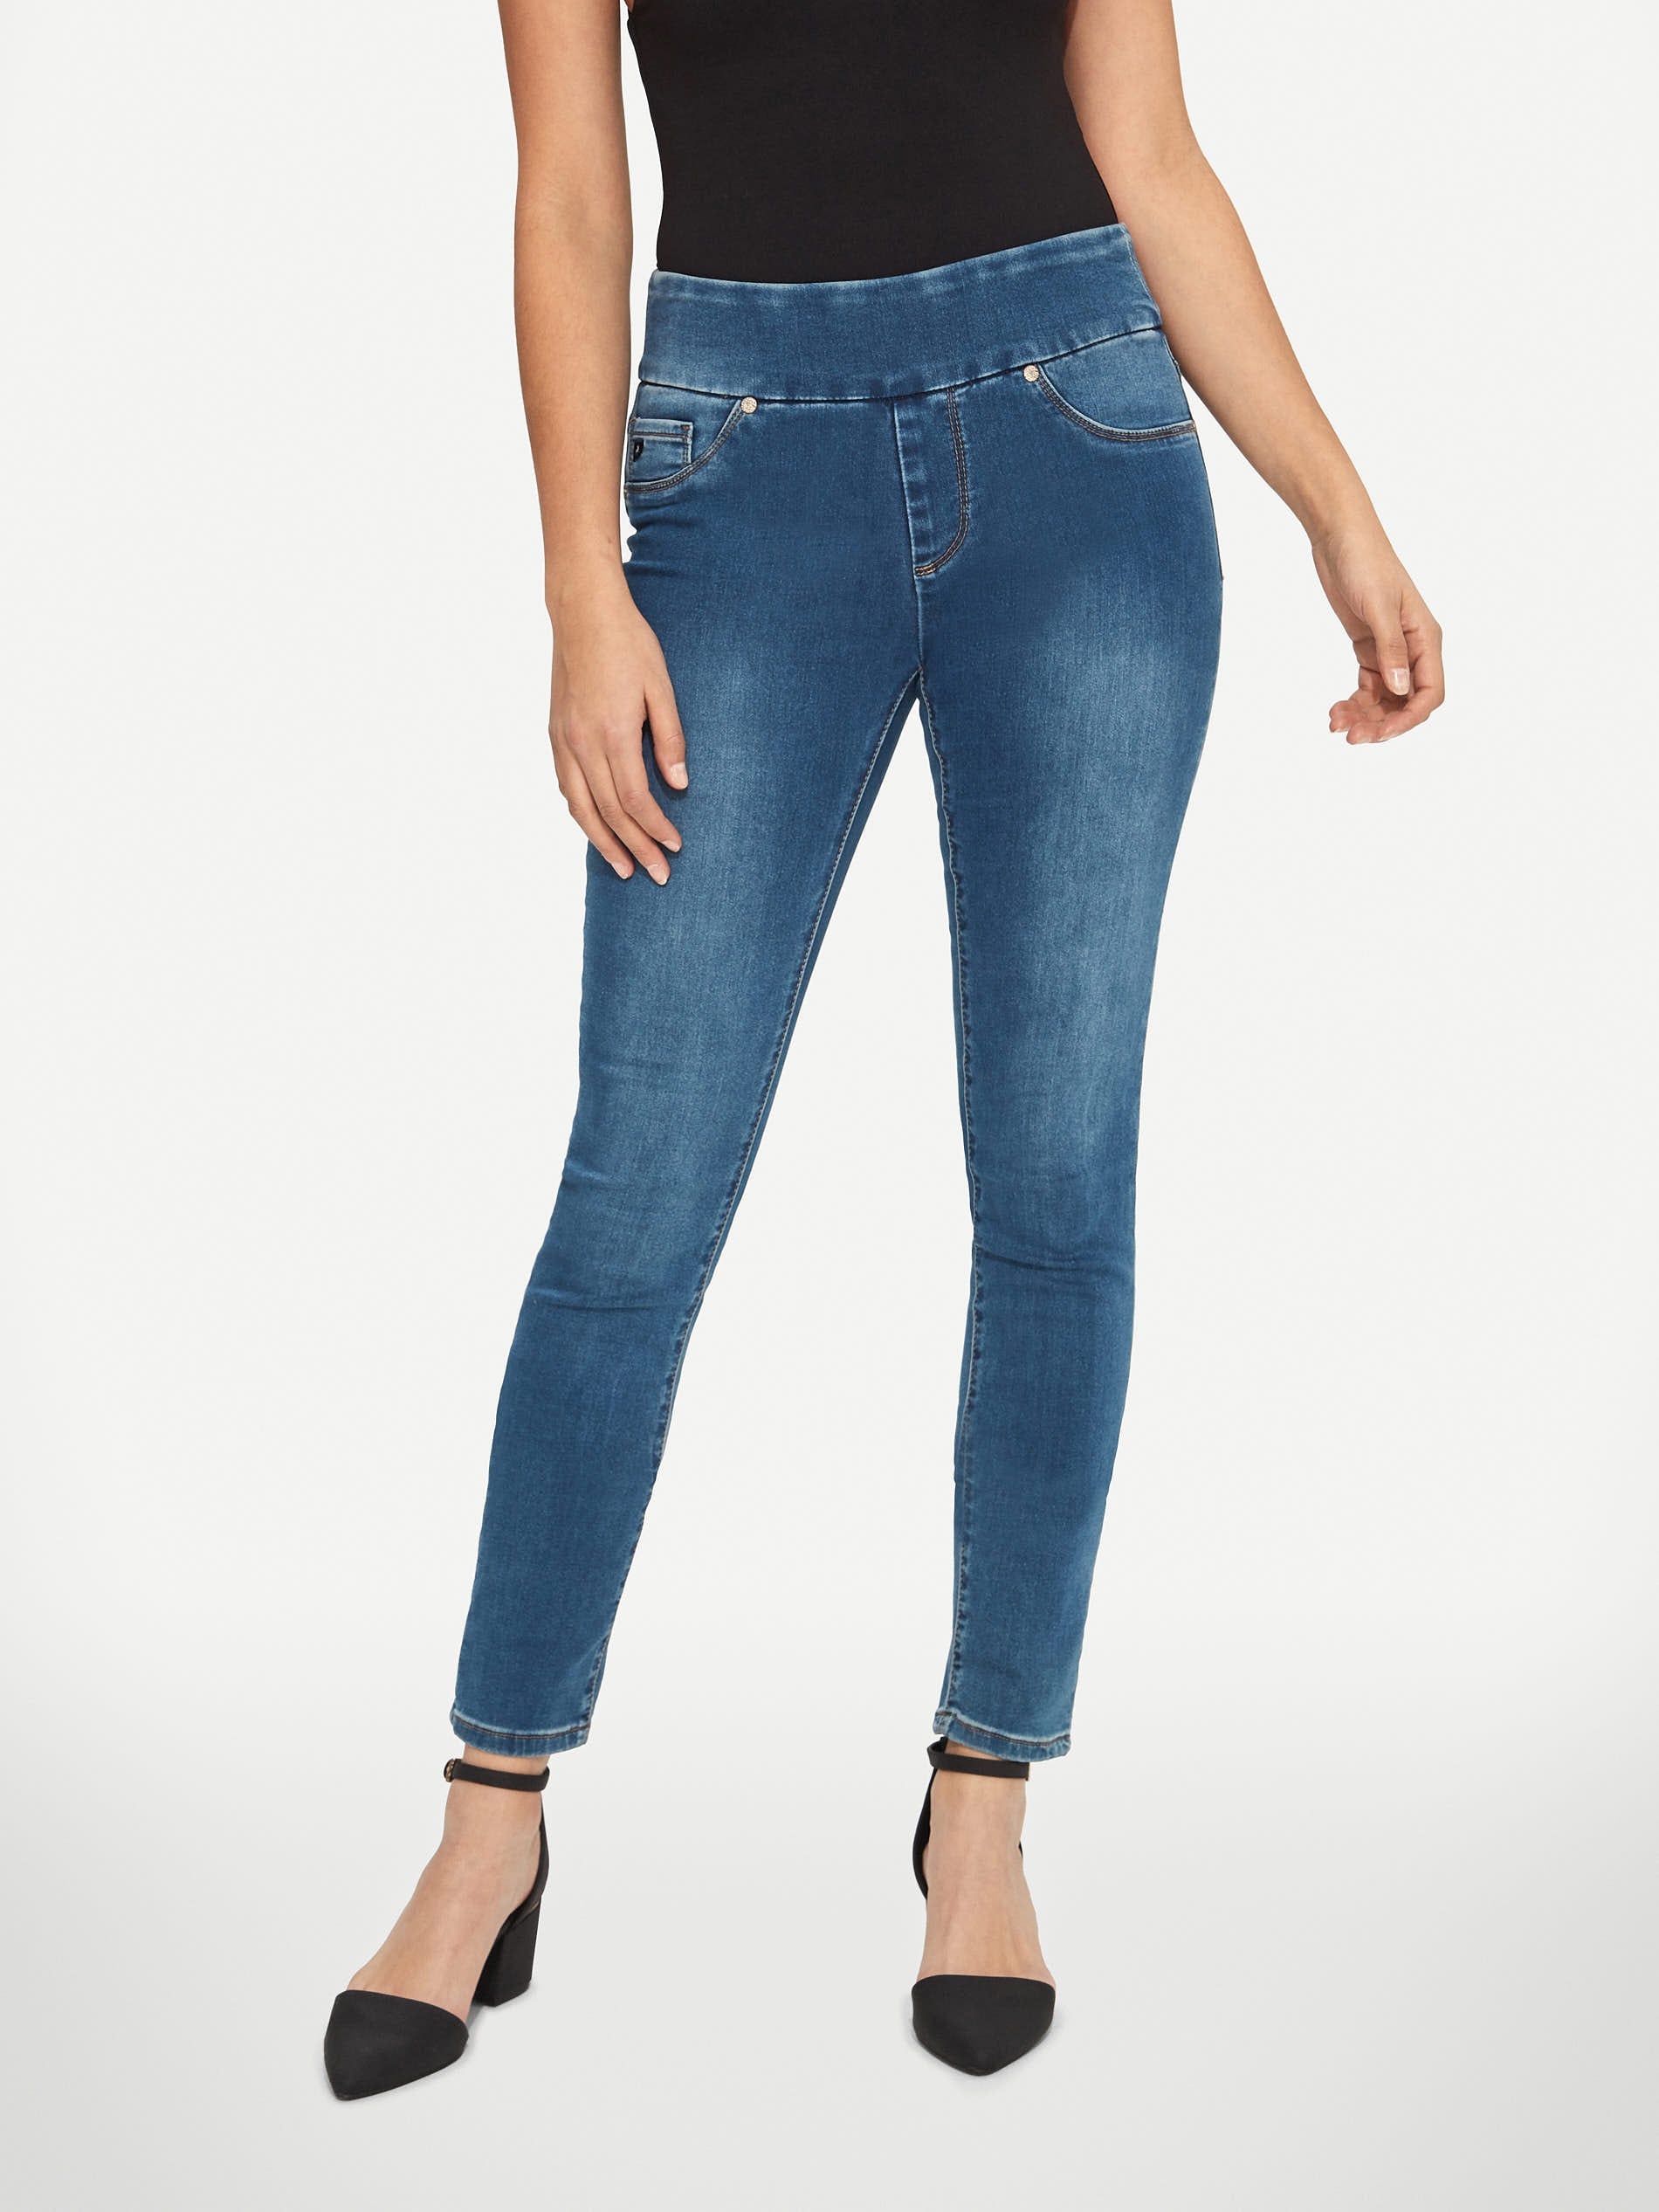 Liette jeans with tight legs